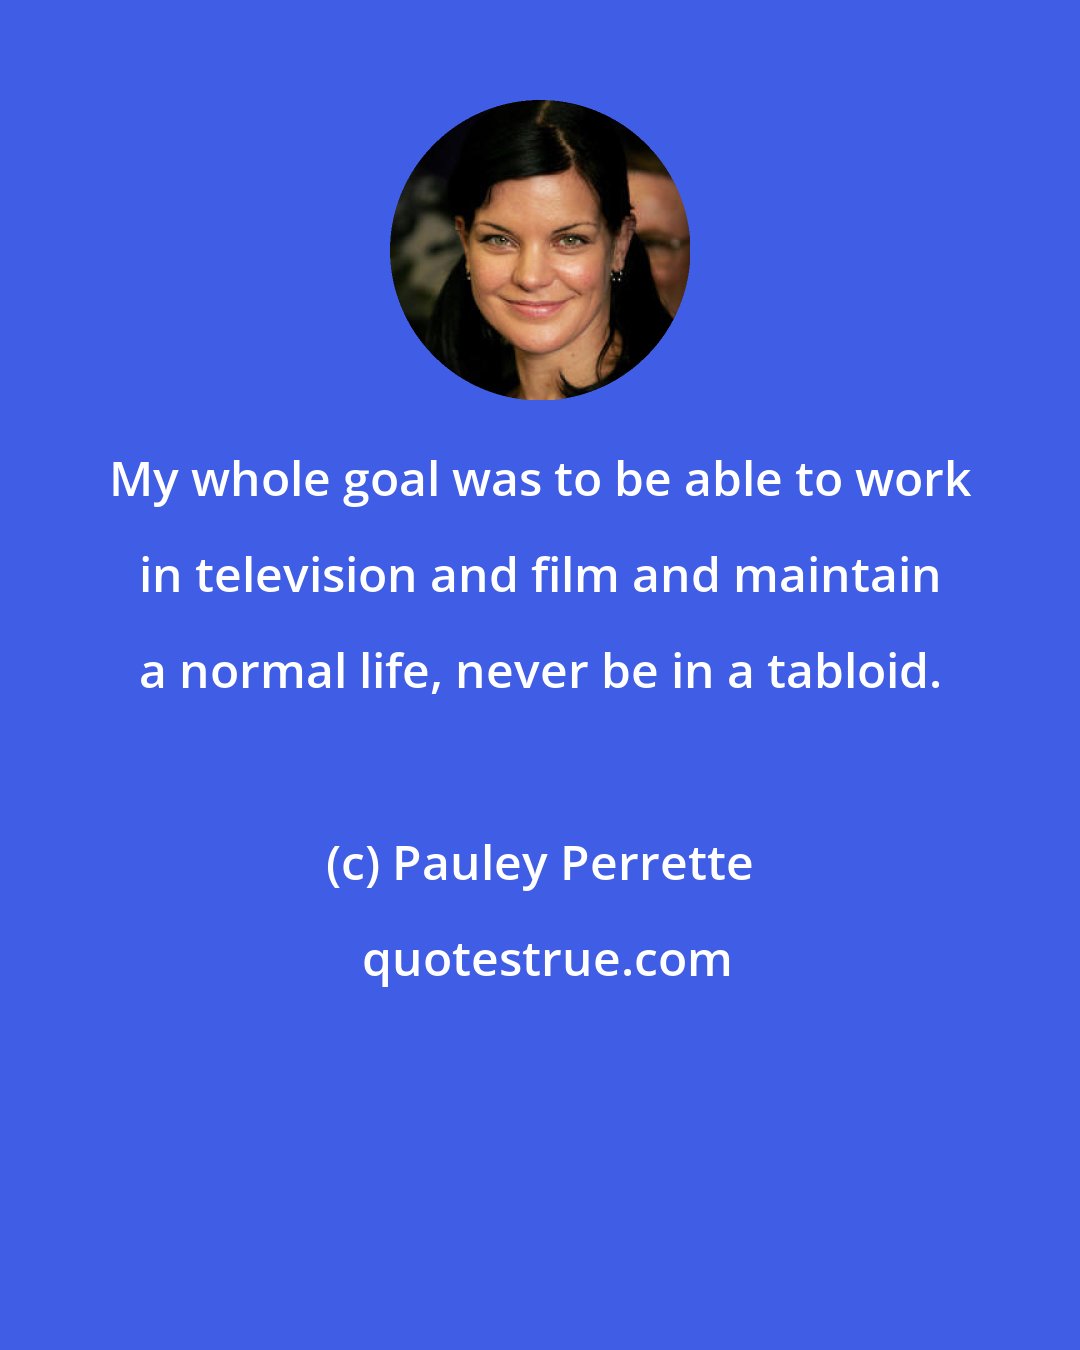 Pauley Perrette: My whole goal was to be able to work in television and film and maintain a normal life, never be in a tabloid.